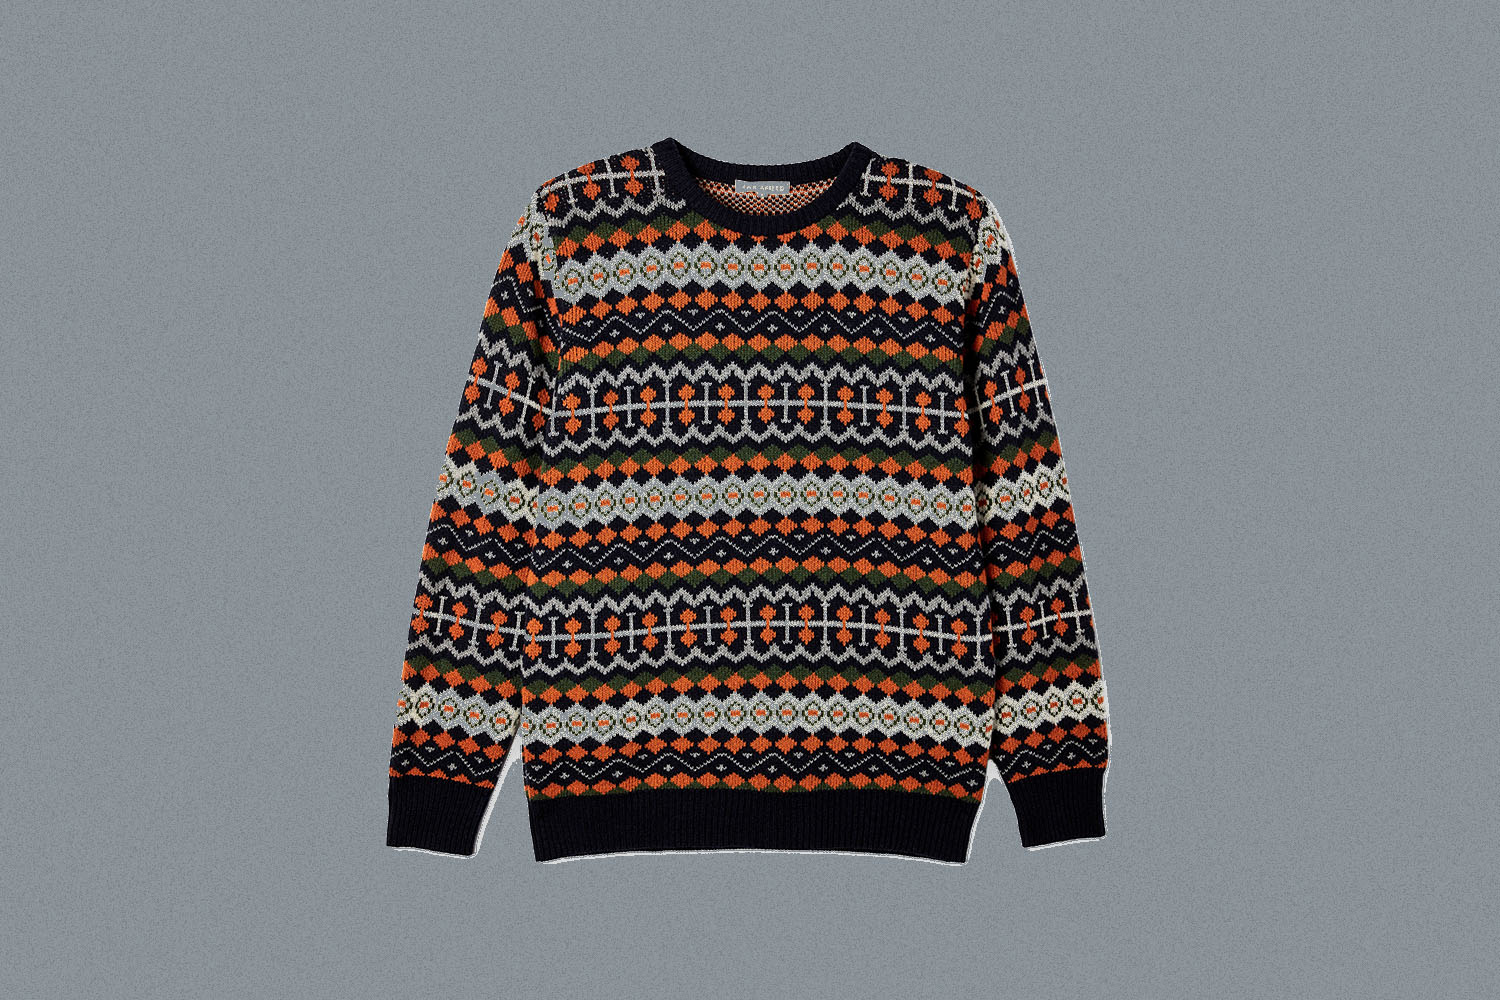 Deal: Sweaters Are Up to 70% Off at Verishop